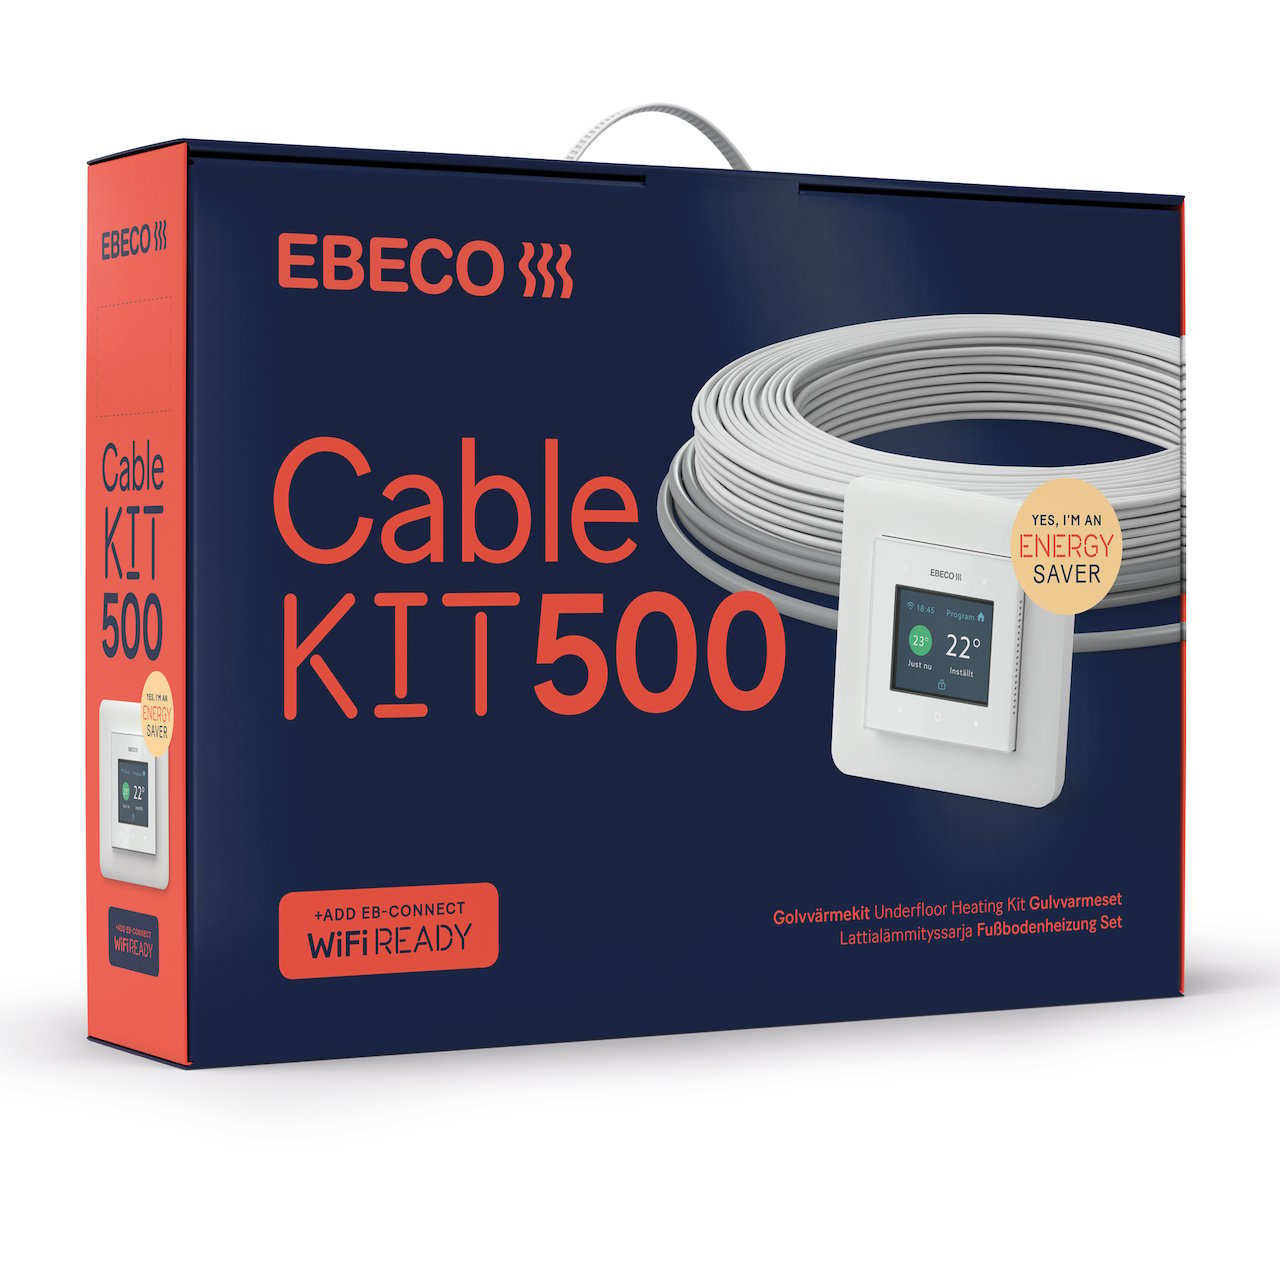 EBECO CABLE KIT 500 31M 330W